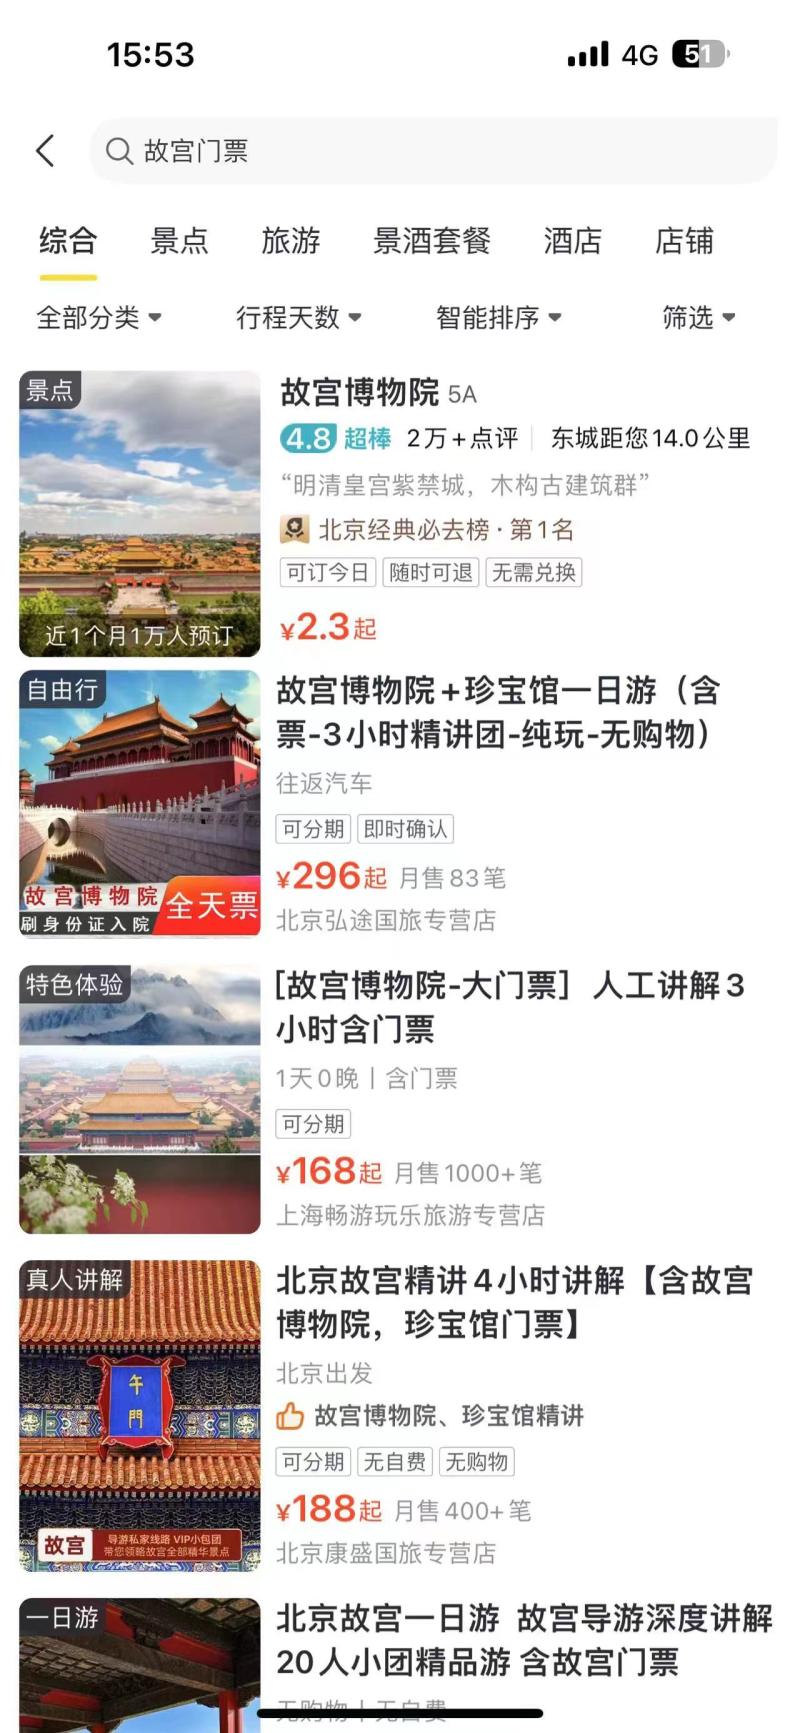 What's going on?, The e-commerce platform has opened an appointment, but the tickets to the Forbidden City have not been released yet. Travel agencies | Tickets | What's going on